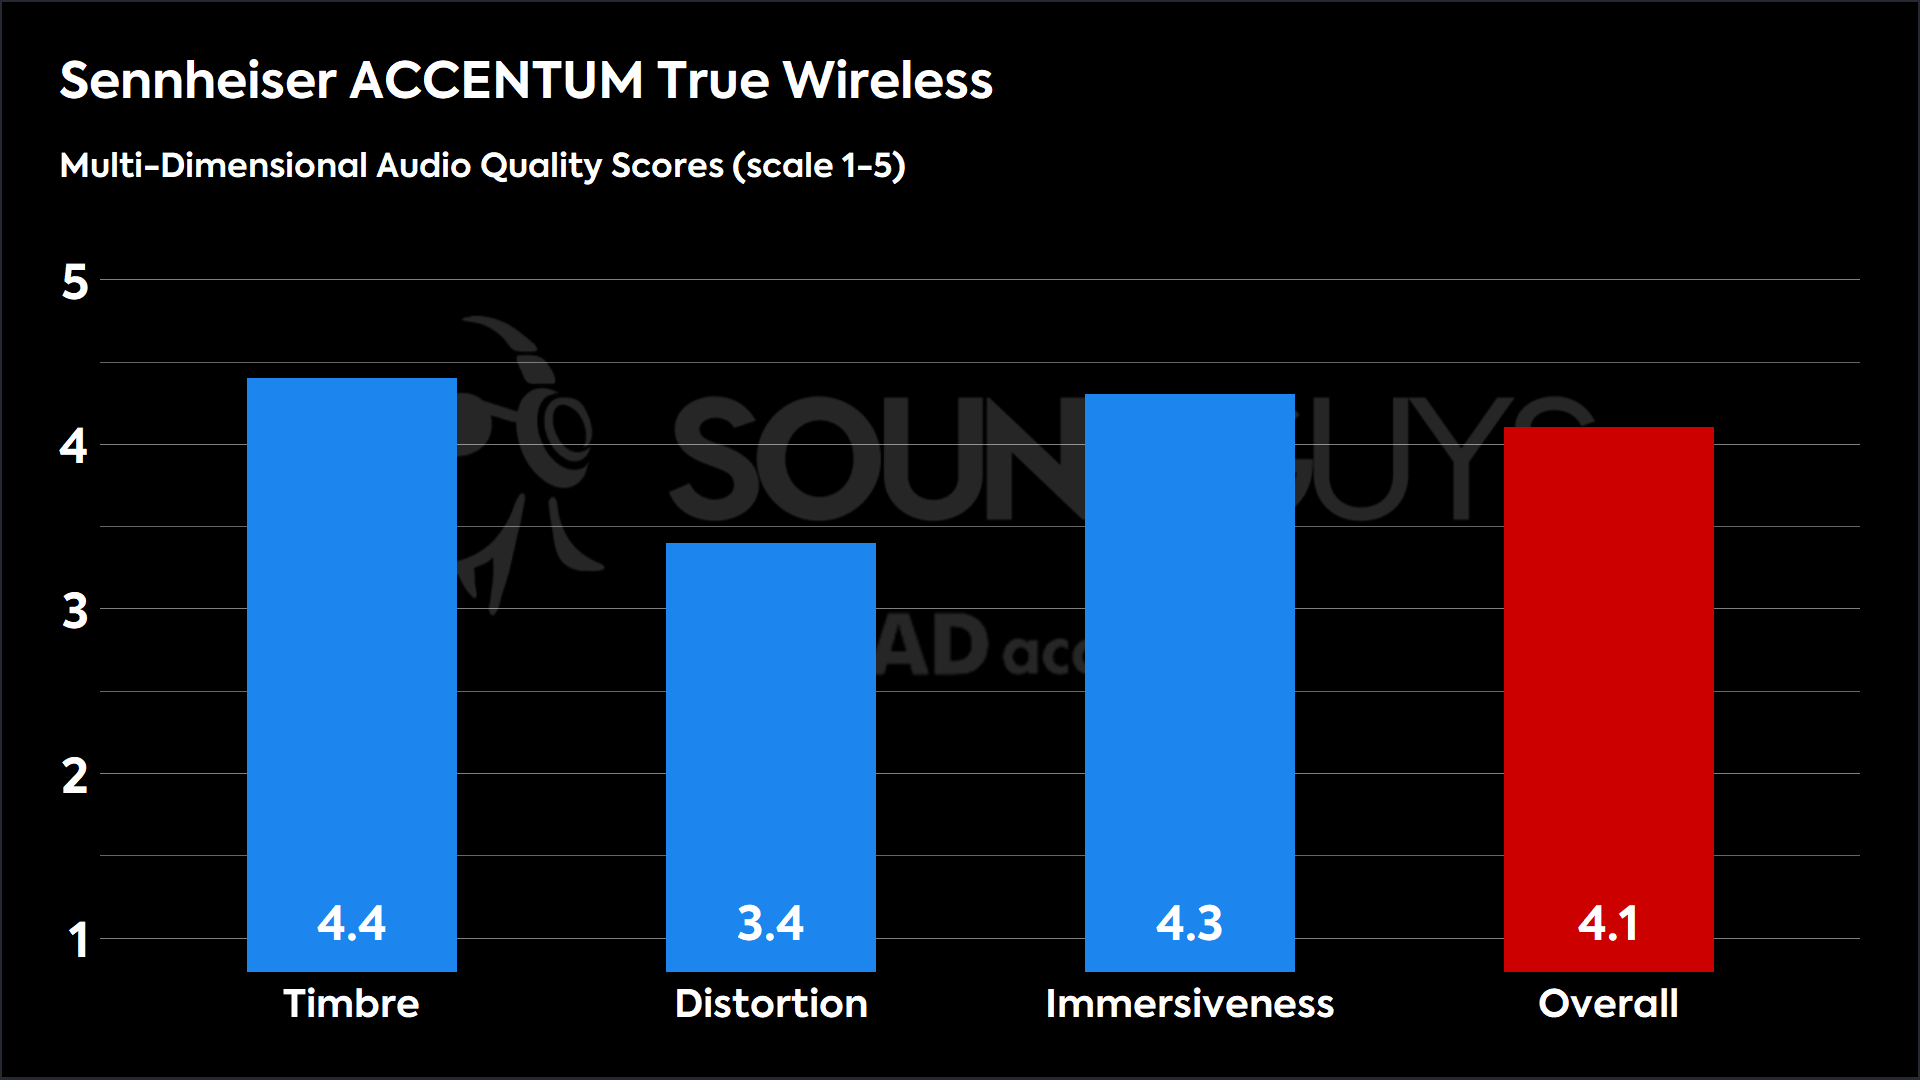 This chart shows the MDAQS results for the Sennheiser ACCENTUM True Wireless in Default mode. The Timbre score is 4.4, The Distortion score is 3.4, the Immersiveness score is 4.3, and the Overall Score is 4.1).